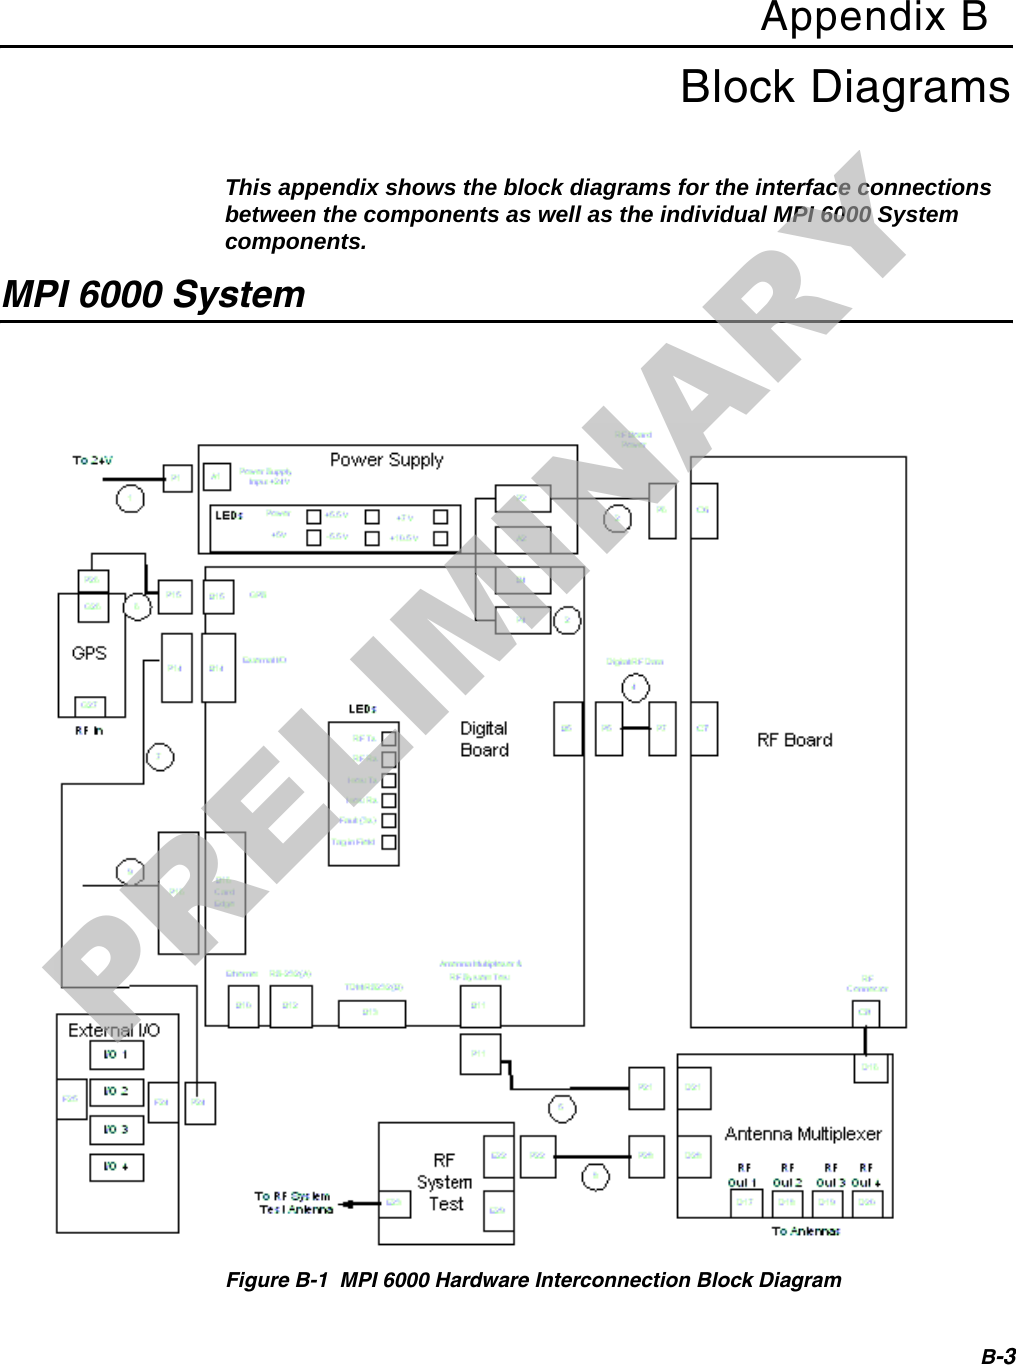 B-3Appendix BBlock DiagramsThis appendix shows the block diagrams for the interface connections between the components as well as the individual MPI 6000 System components.MPI 6000 SystemFigure B-1  MPI 6000 Hardware Interconnection Block DiagramPRELIMINARY